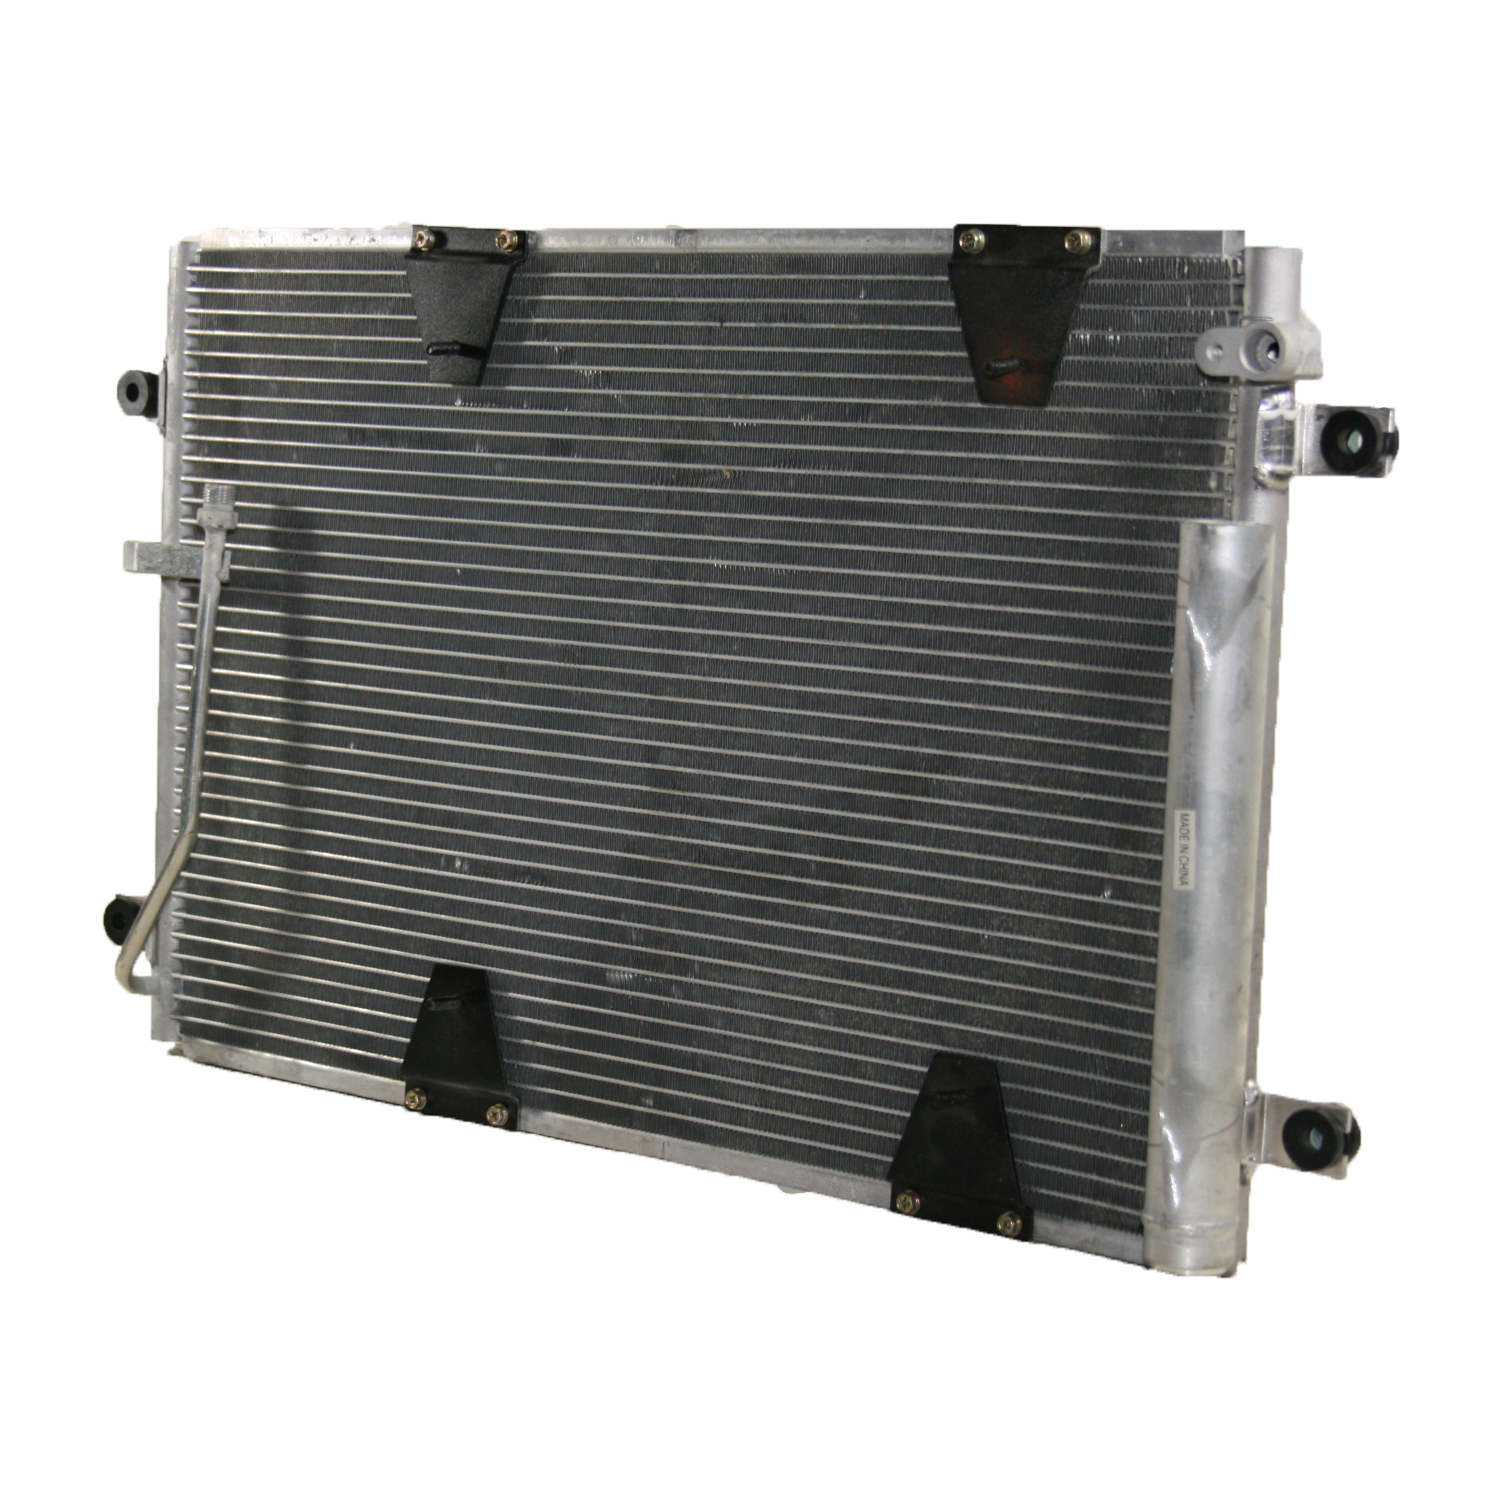 TCW Condenser 44-3423 New Product Image field_60b6a13a6e67c